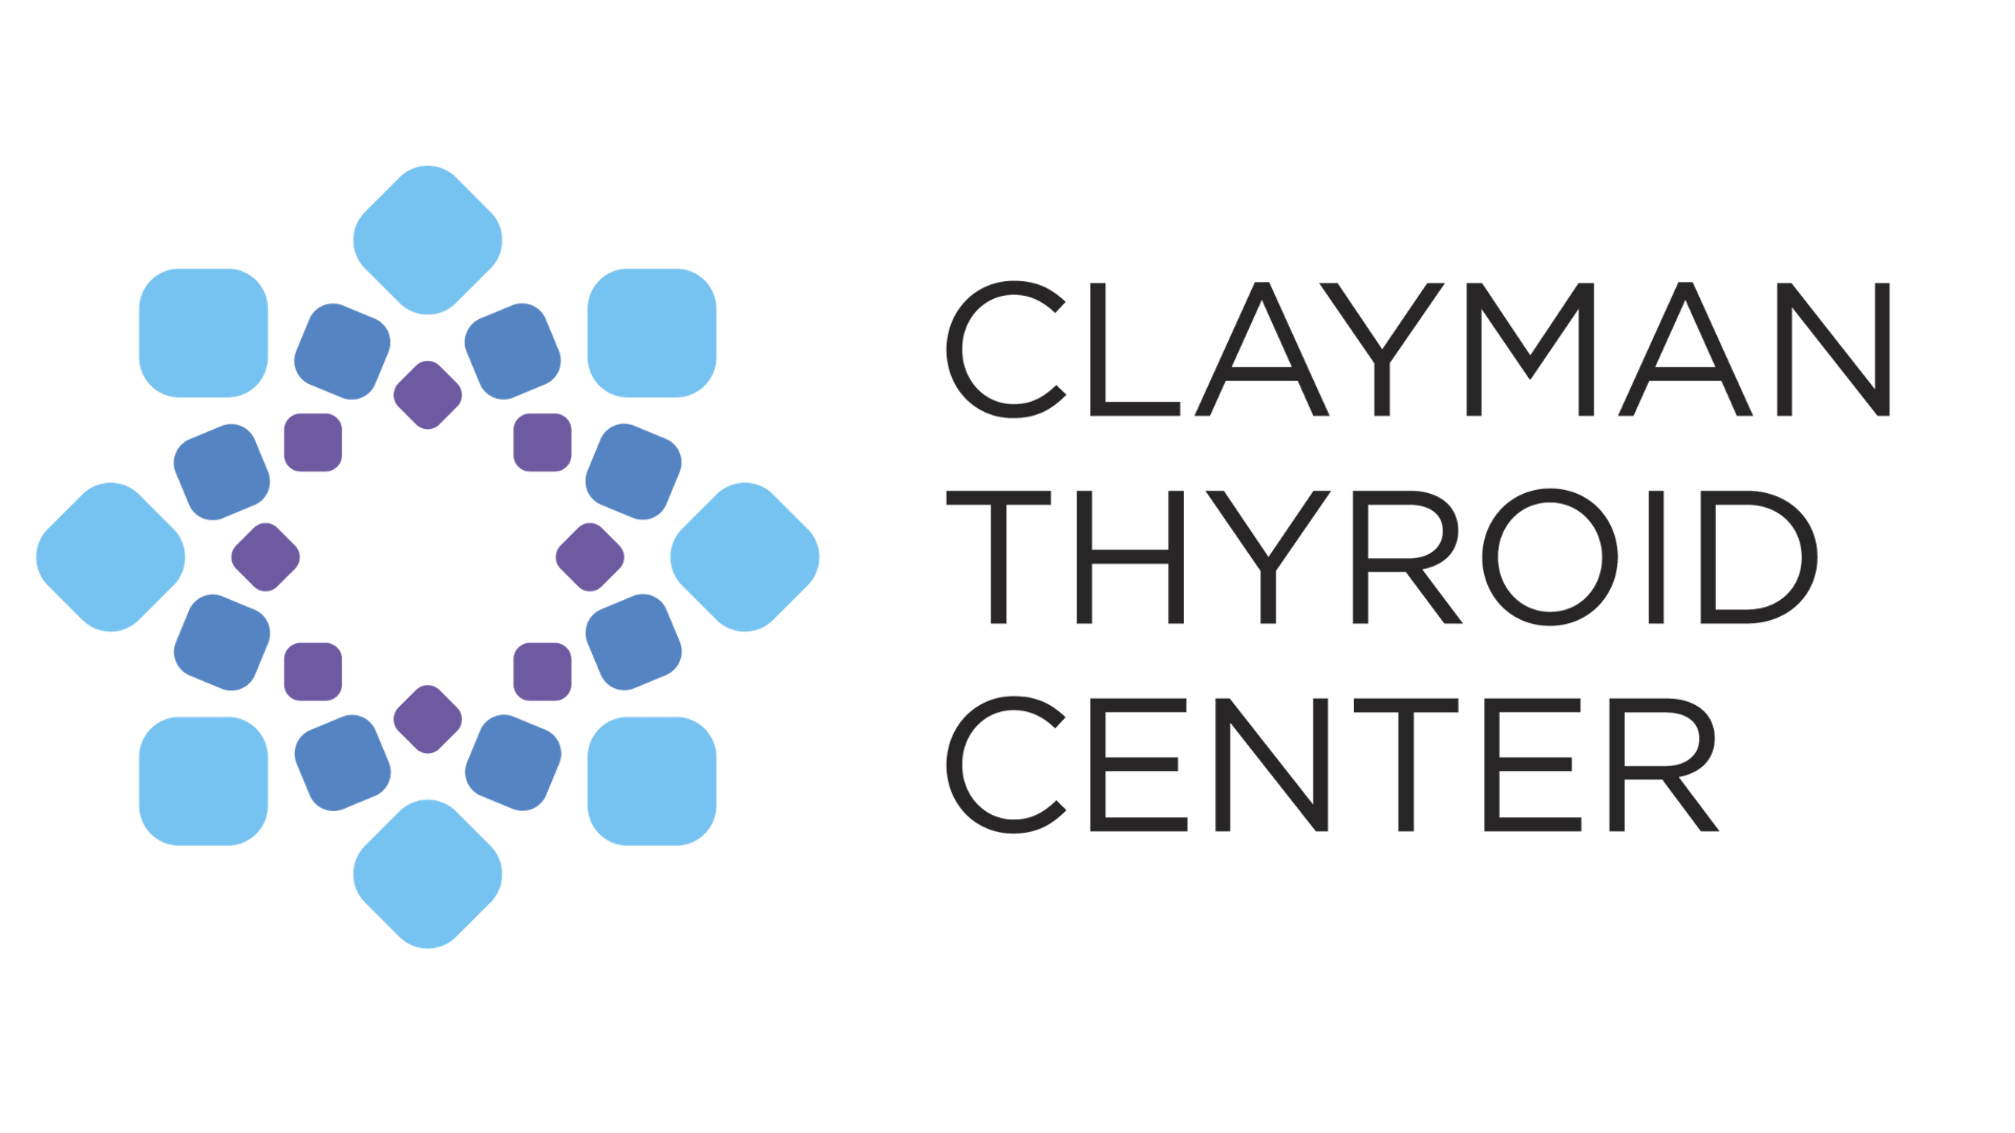 ThyroidCancerCenter.com is a comprehensive and easy to understand source for information on all thyroid disorders, with an emphasis on thyroid cancer and the diagnosis and treatment of thyroid cancer.